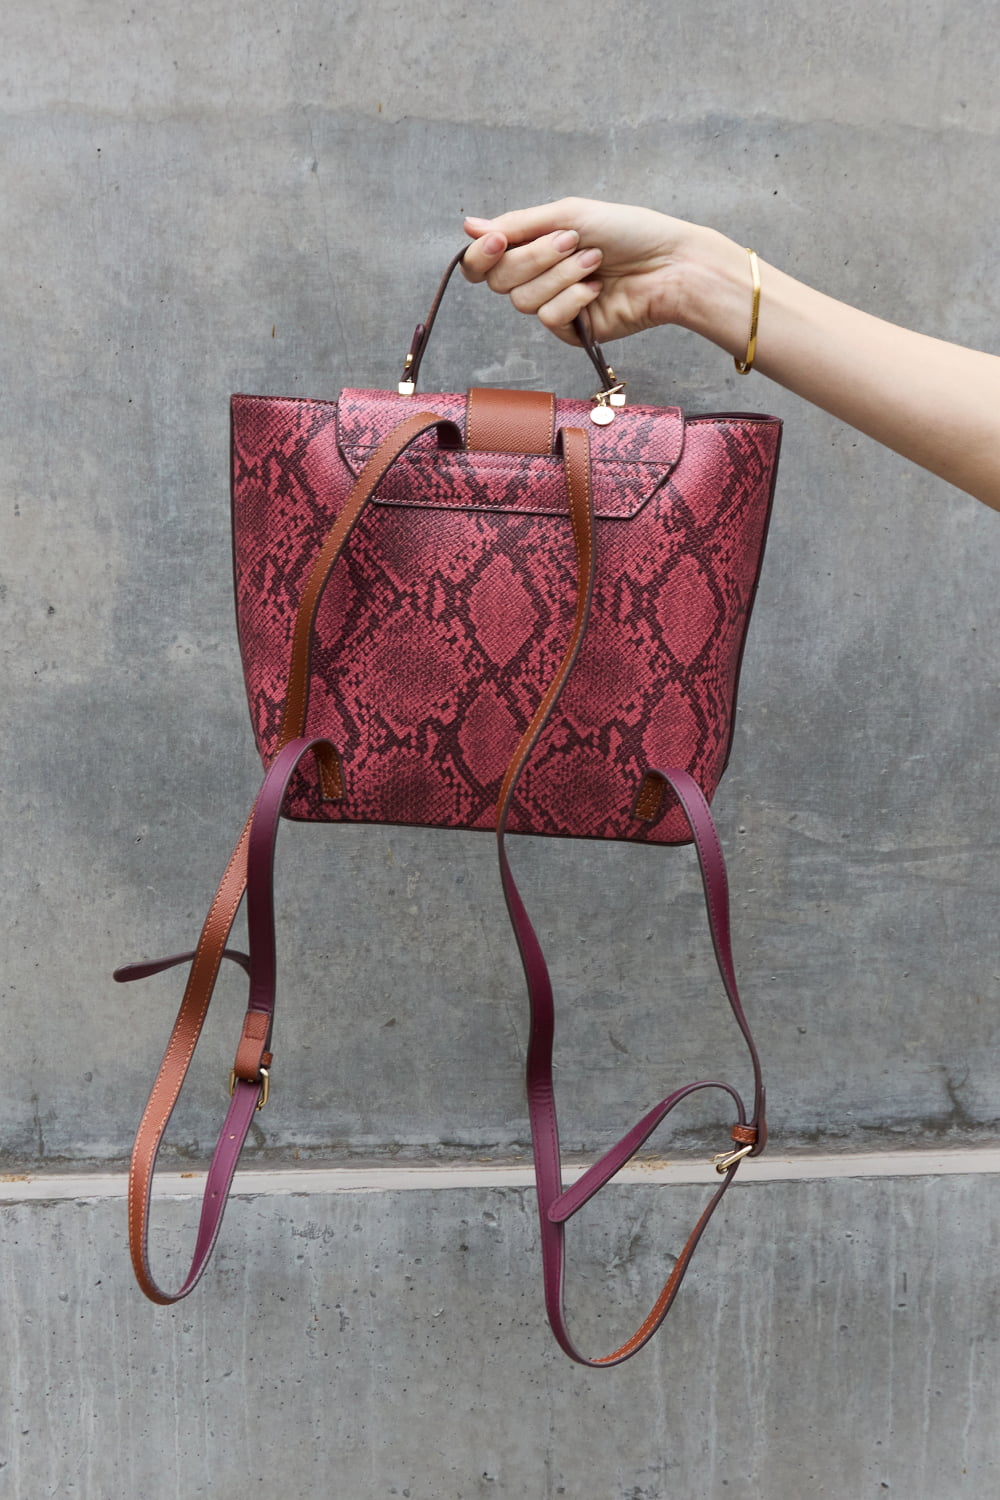 FREE GIFT WITH $150 PURCHASE Python Bag 3-Piece Set